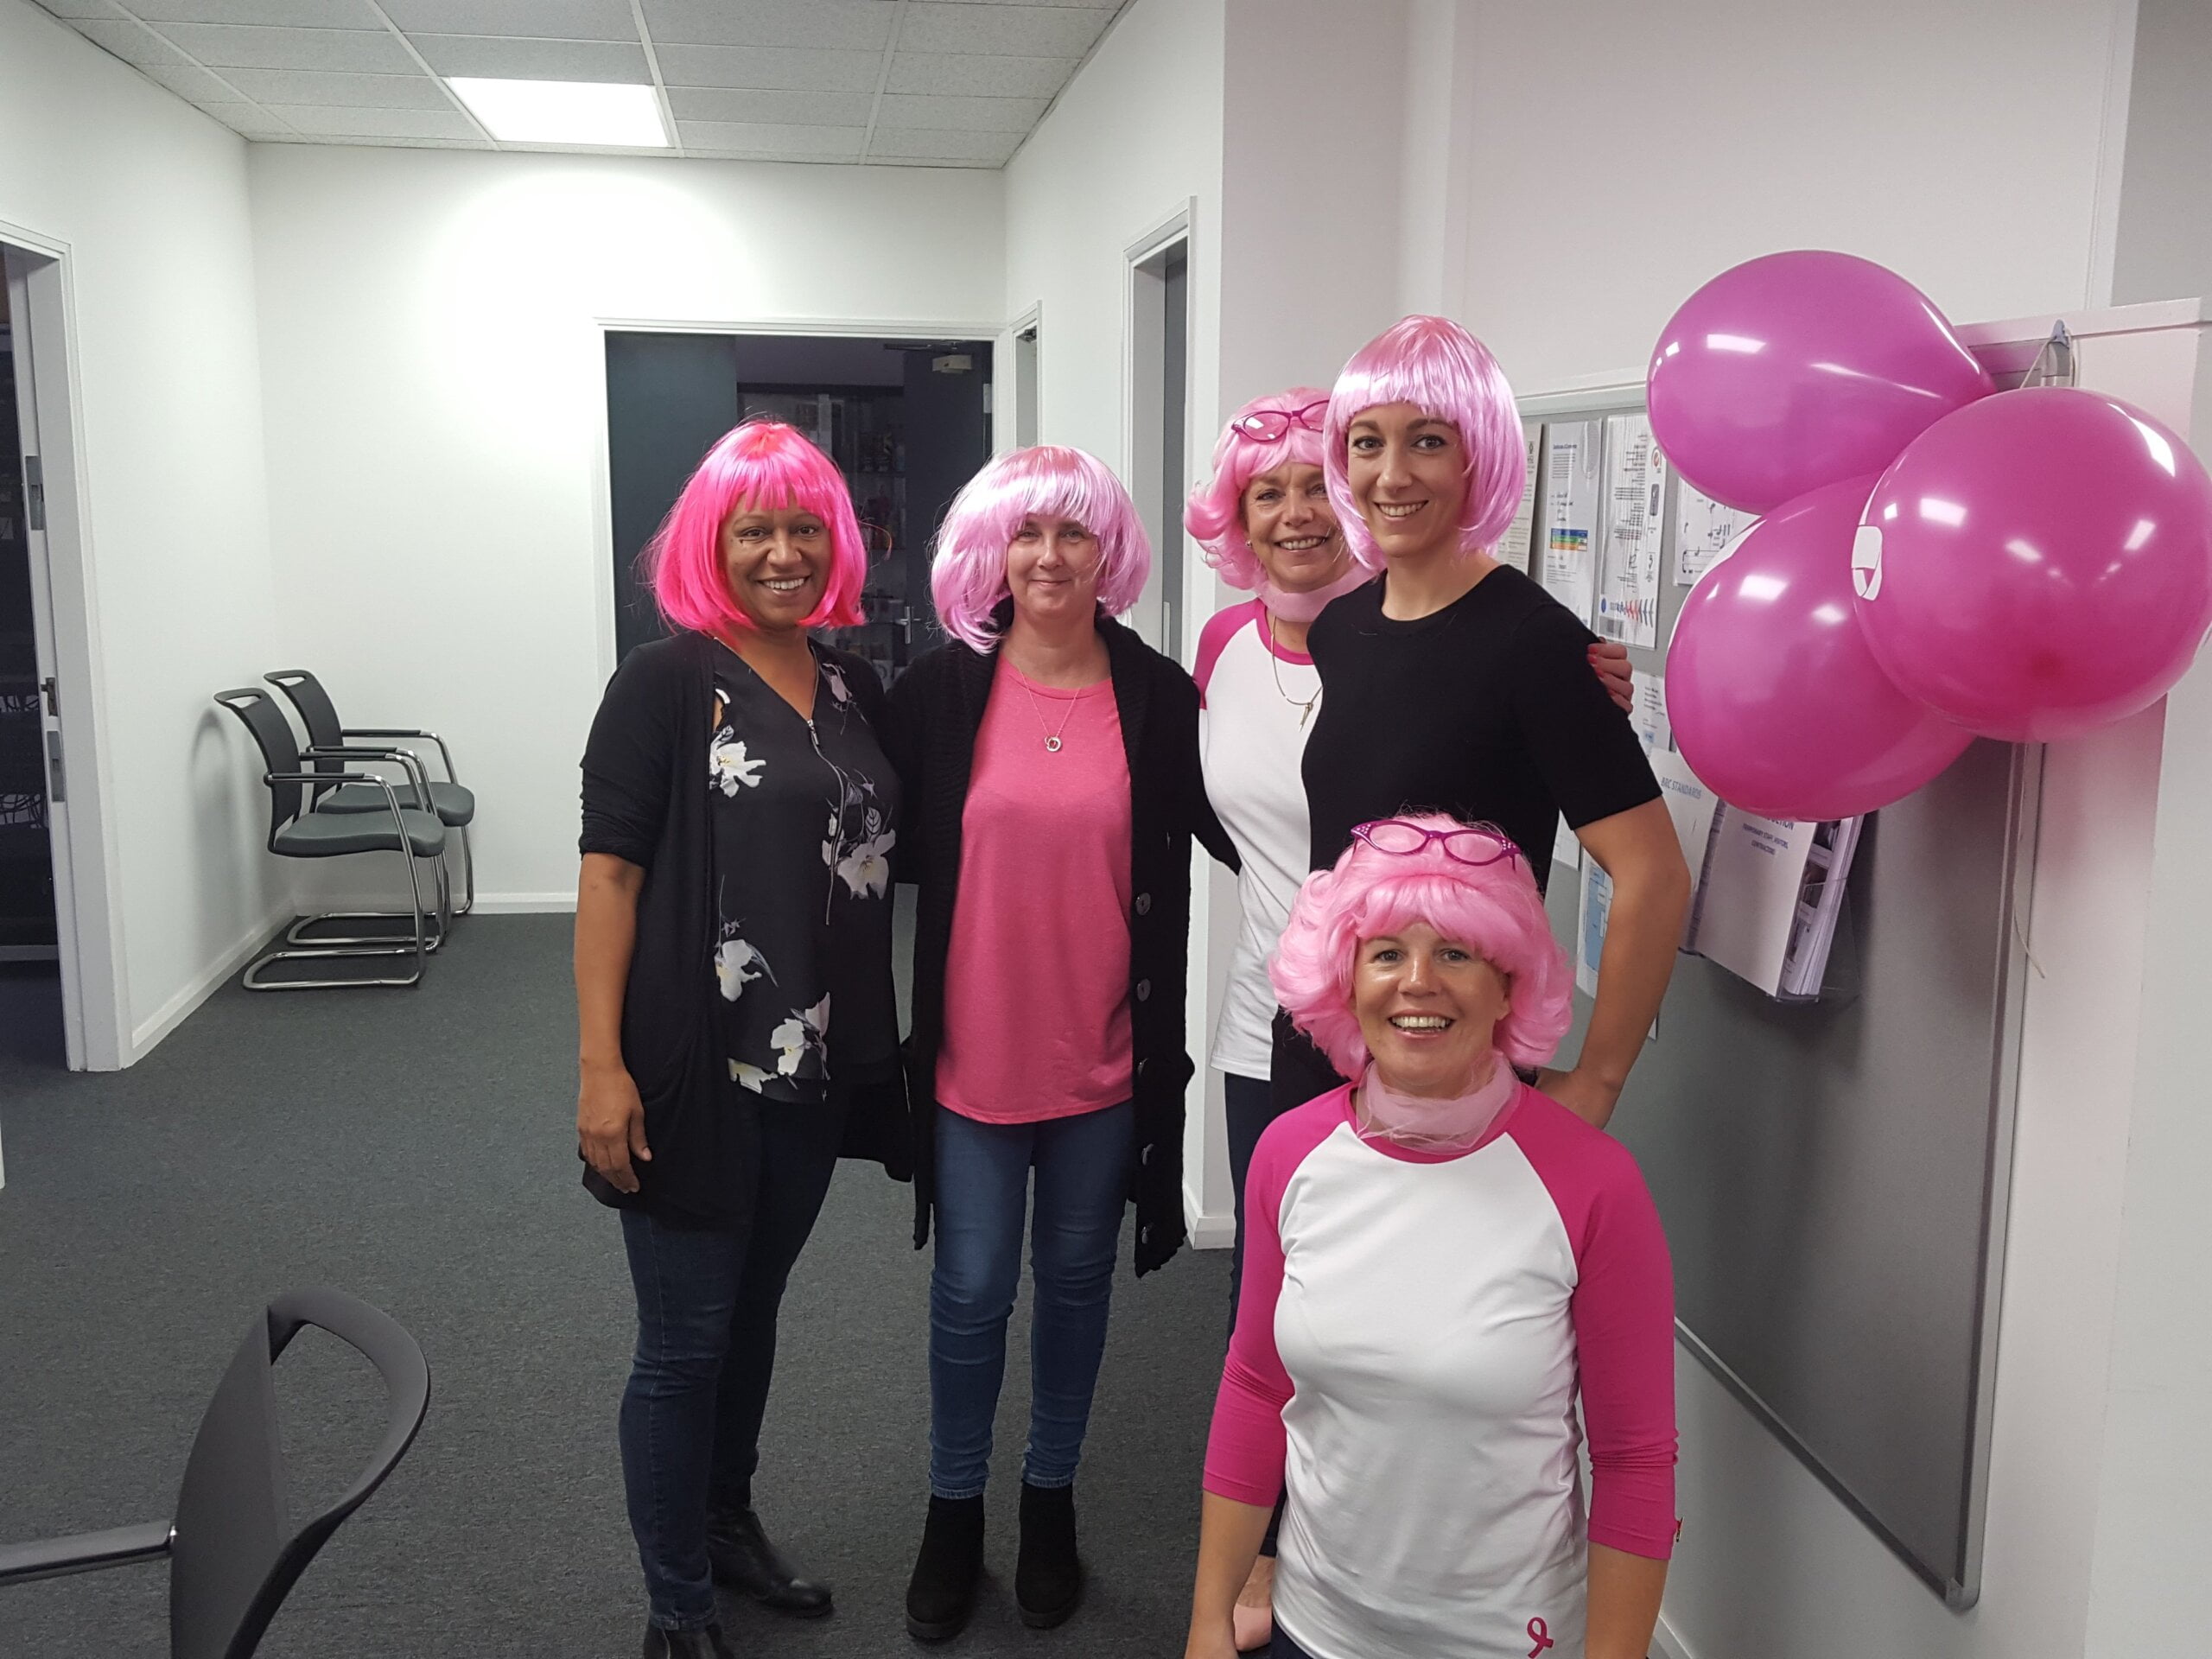 Tickled pink to raise money for charity